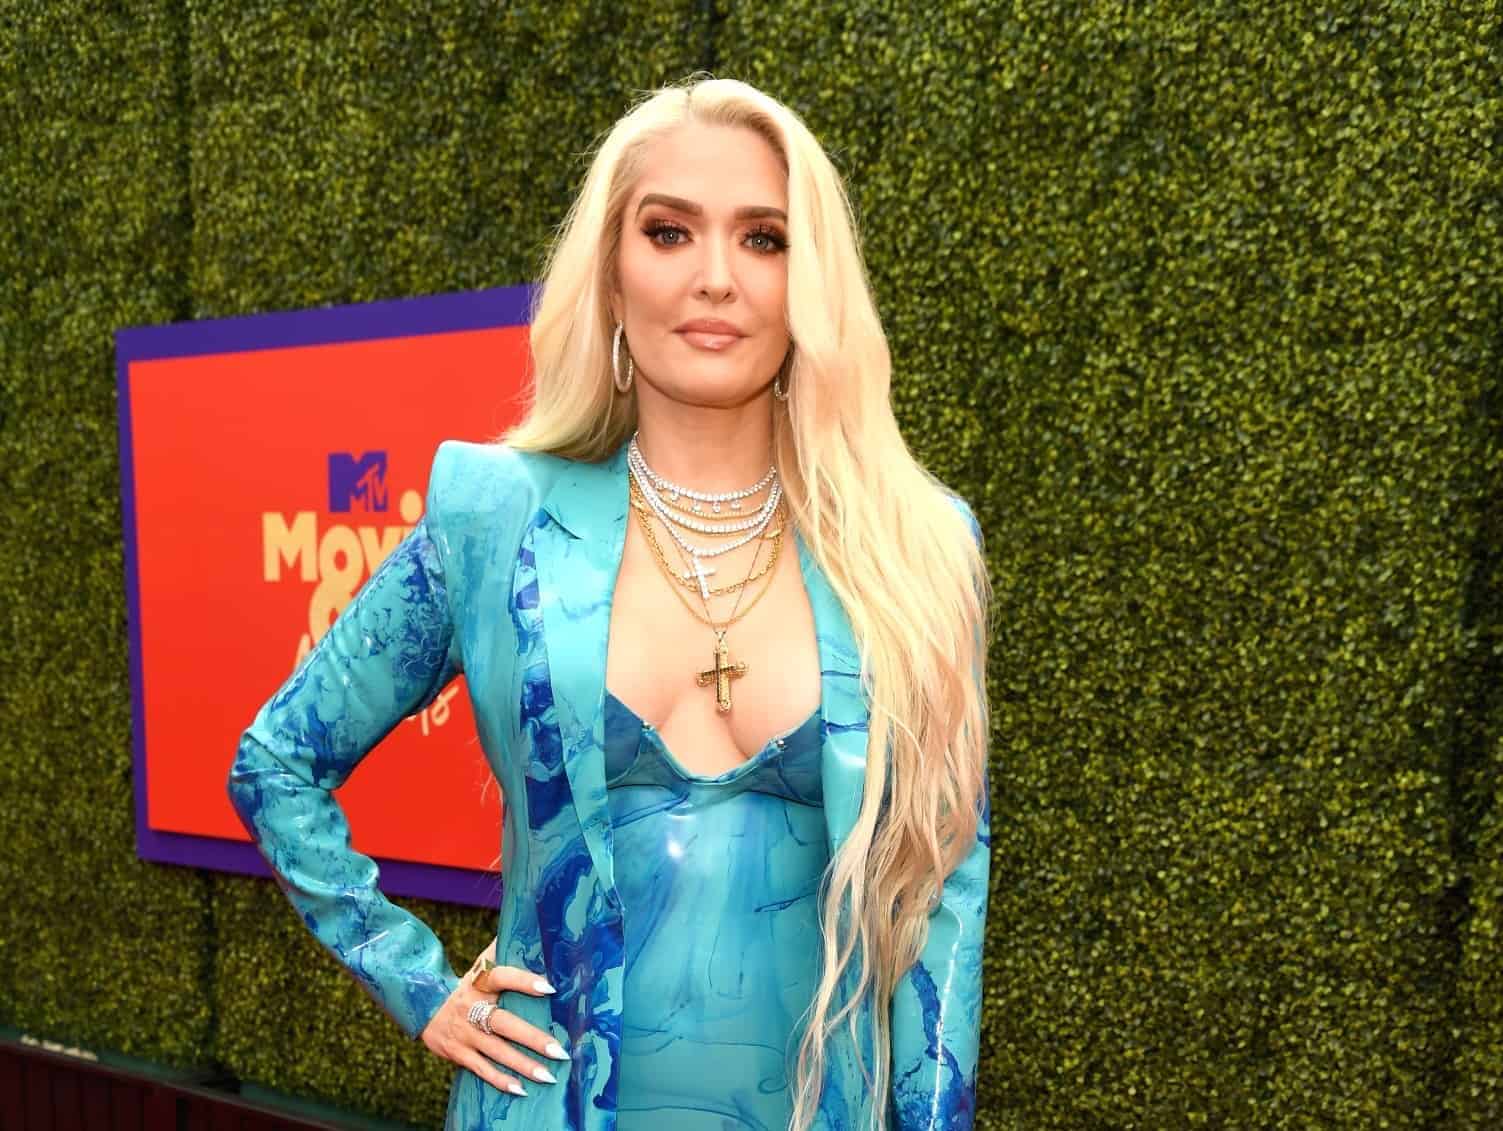 Attorney Slams "Tone Deaf" Erika Jayne for Suggesting She's "Slumming It" in $10k/Month Rental, Reveals How Claims of Thomas' Mental Incompetence Will Be Against Her